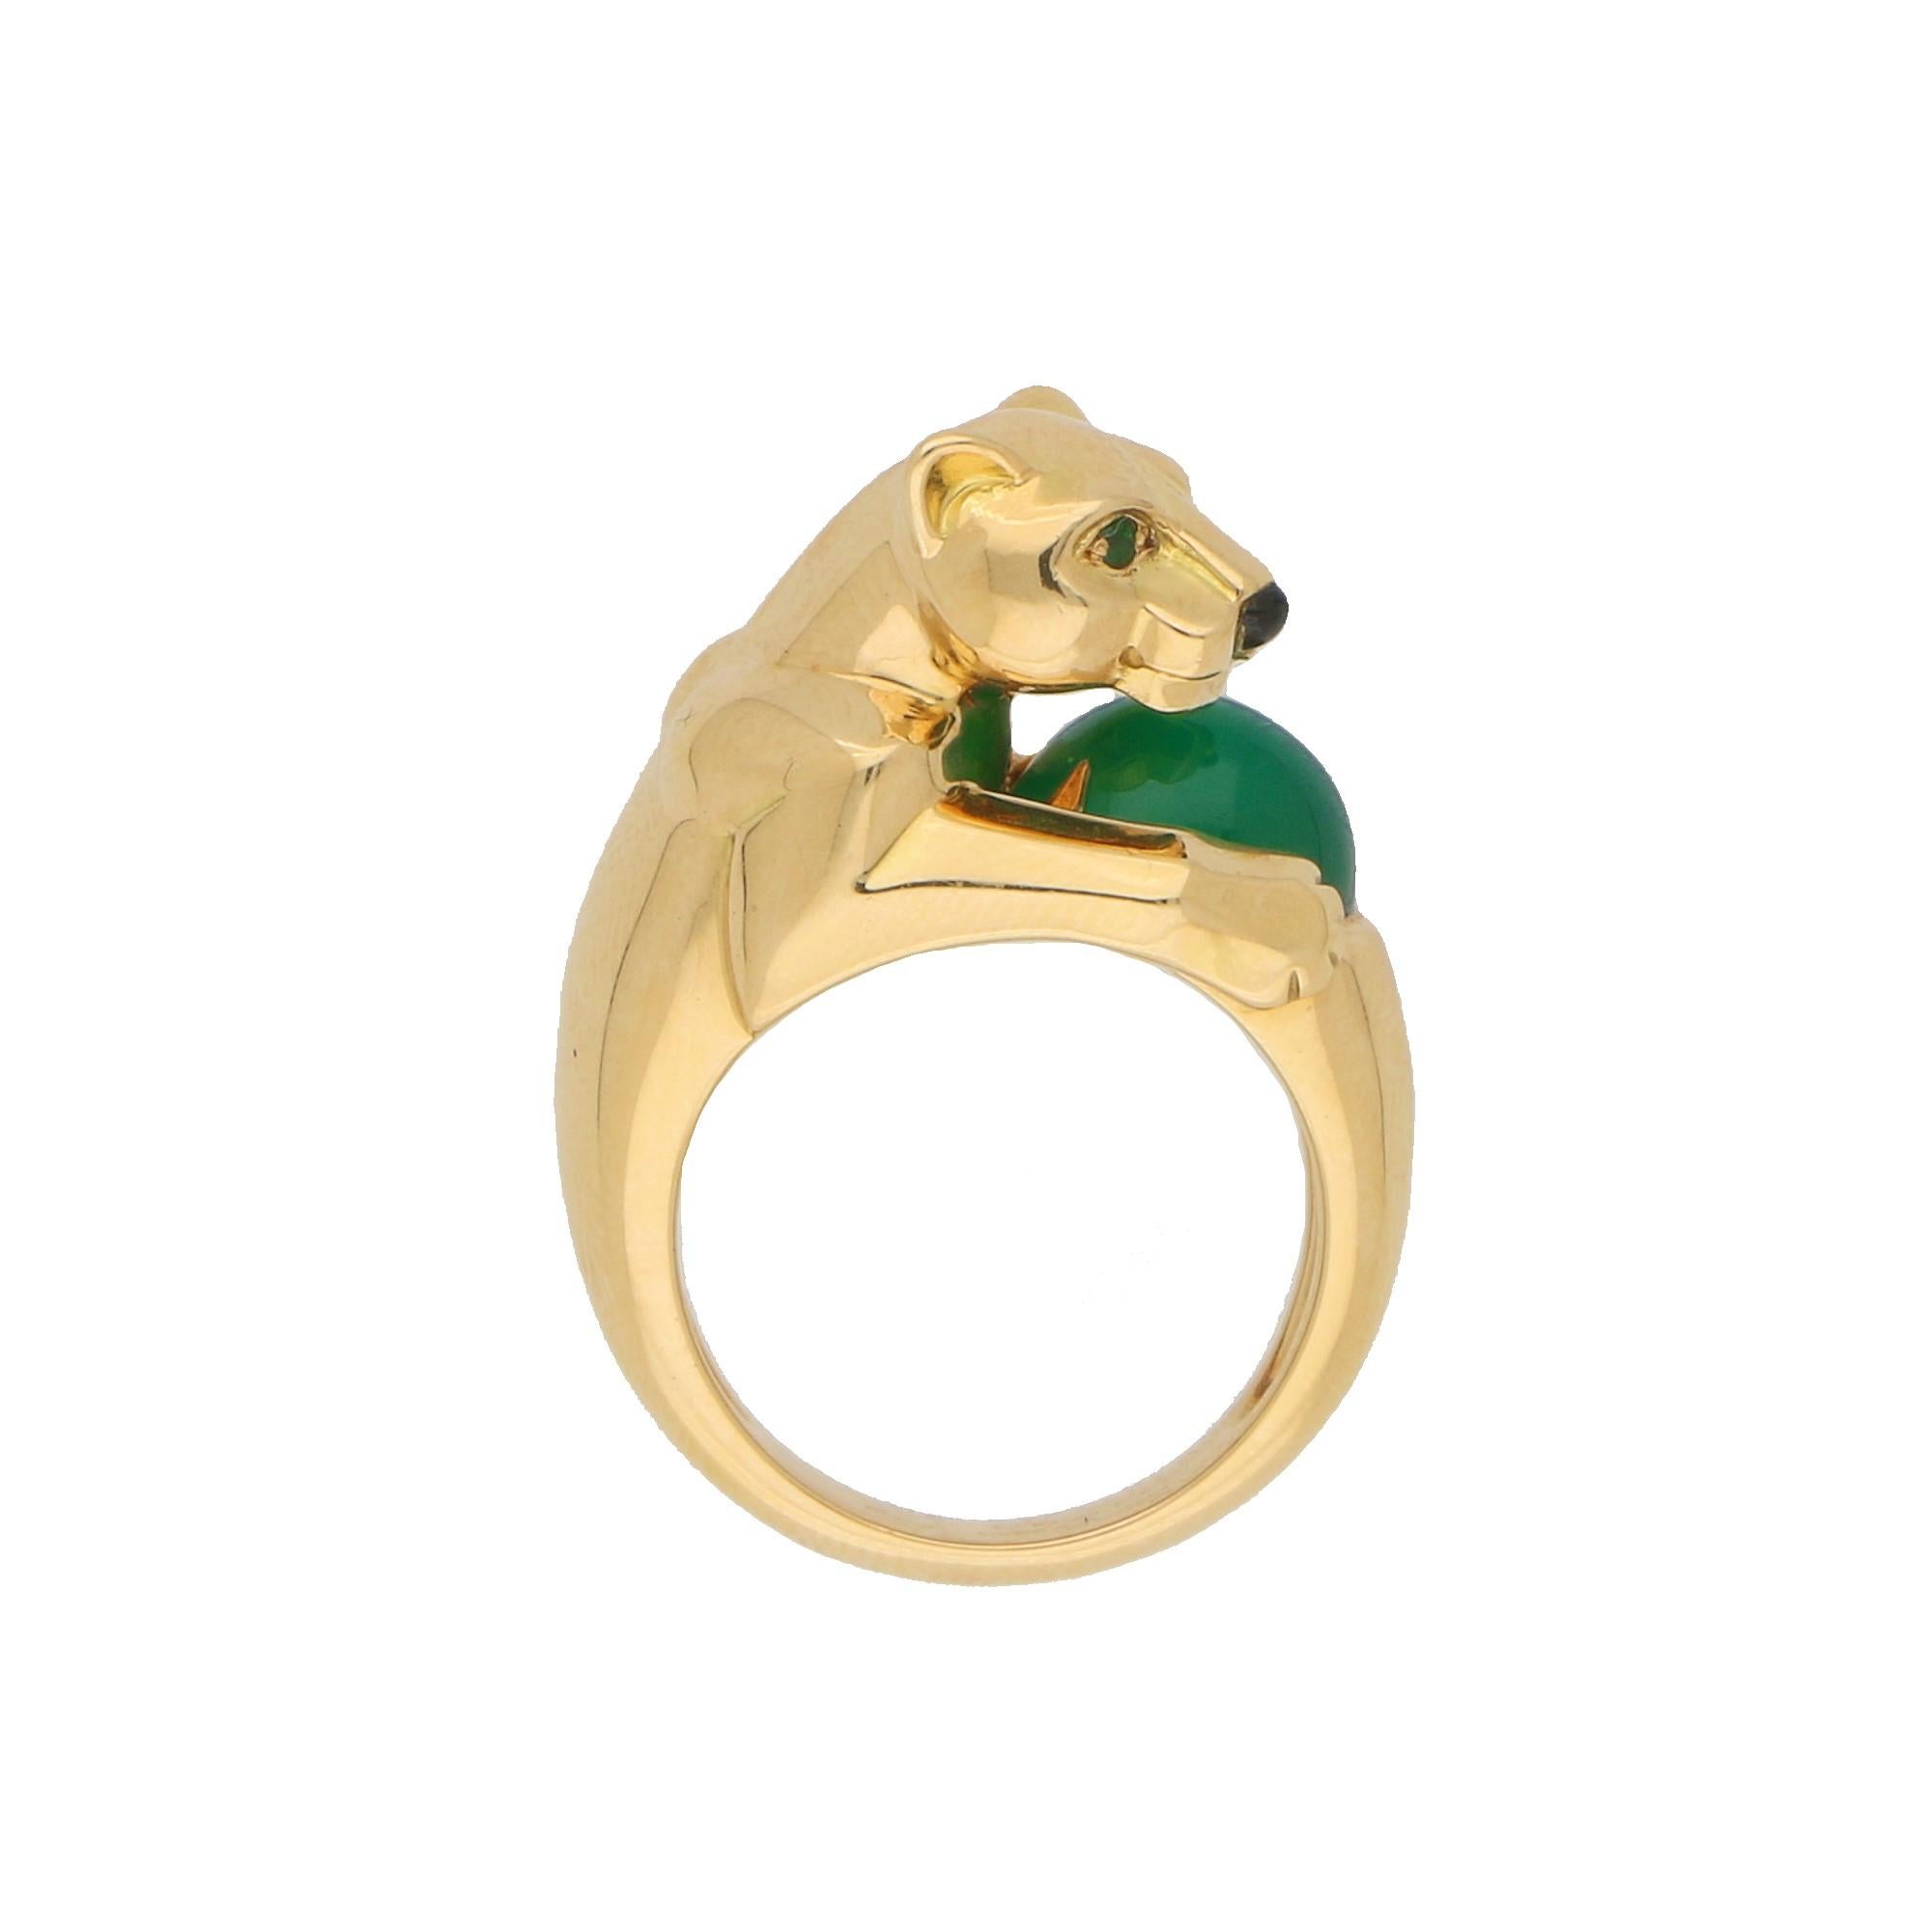 A classic Cartier Panthère ring set in solid 18k yellow gold. This rare version of the Cartier Panthère ring prominently features a polished yellow gold panther motif holding a beautiful polished green cabochon chalcedony bead. The panther is set